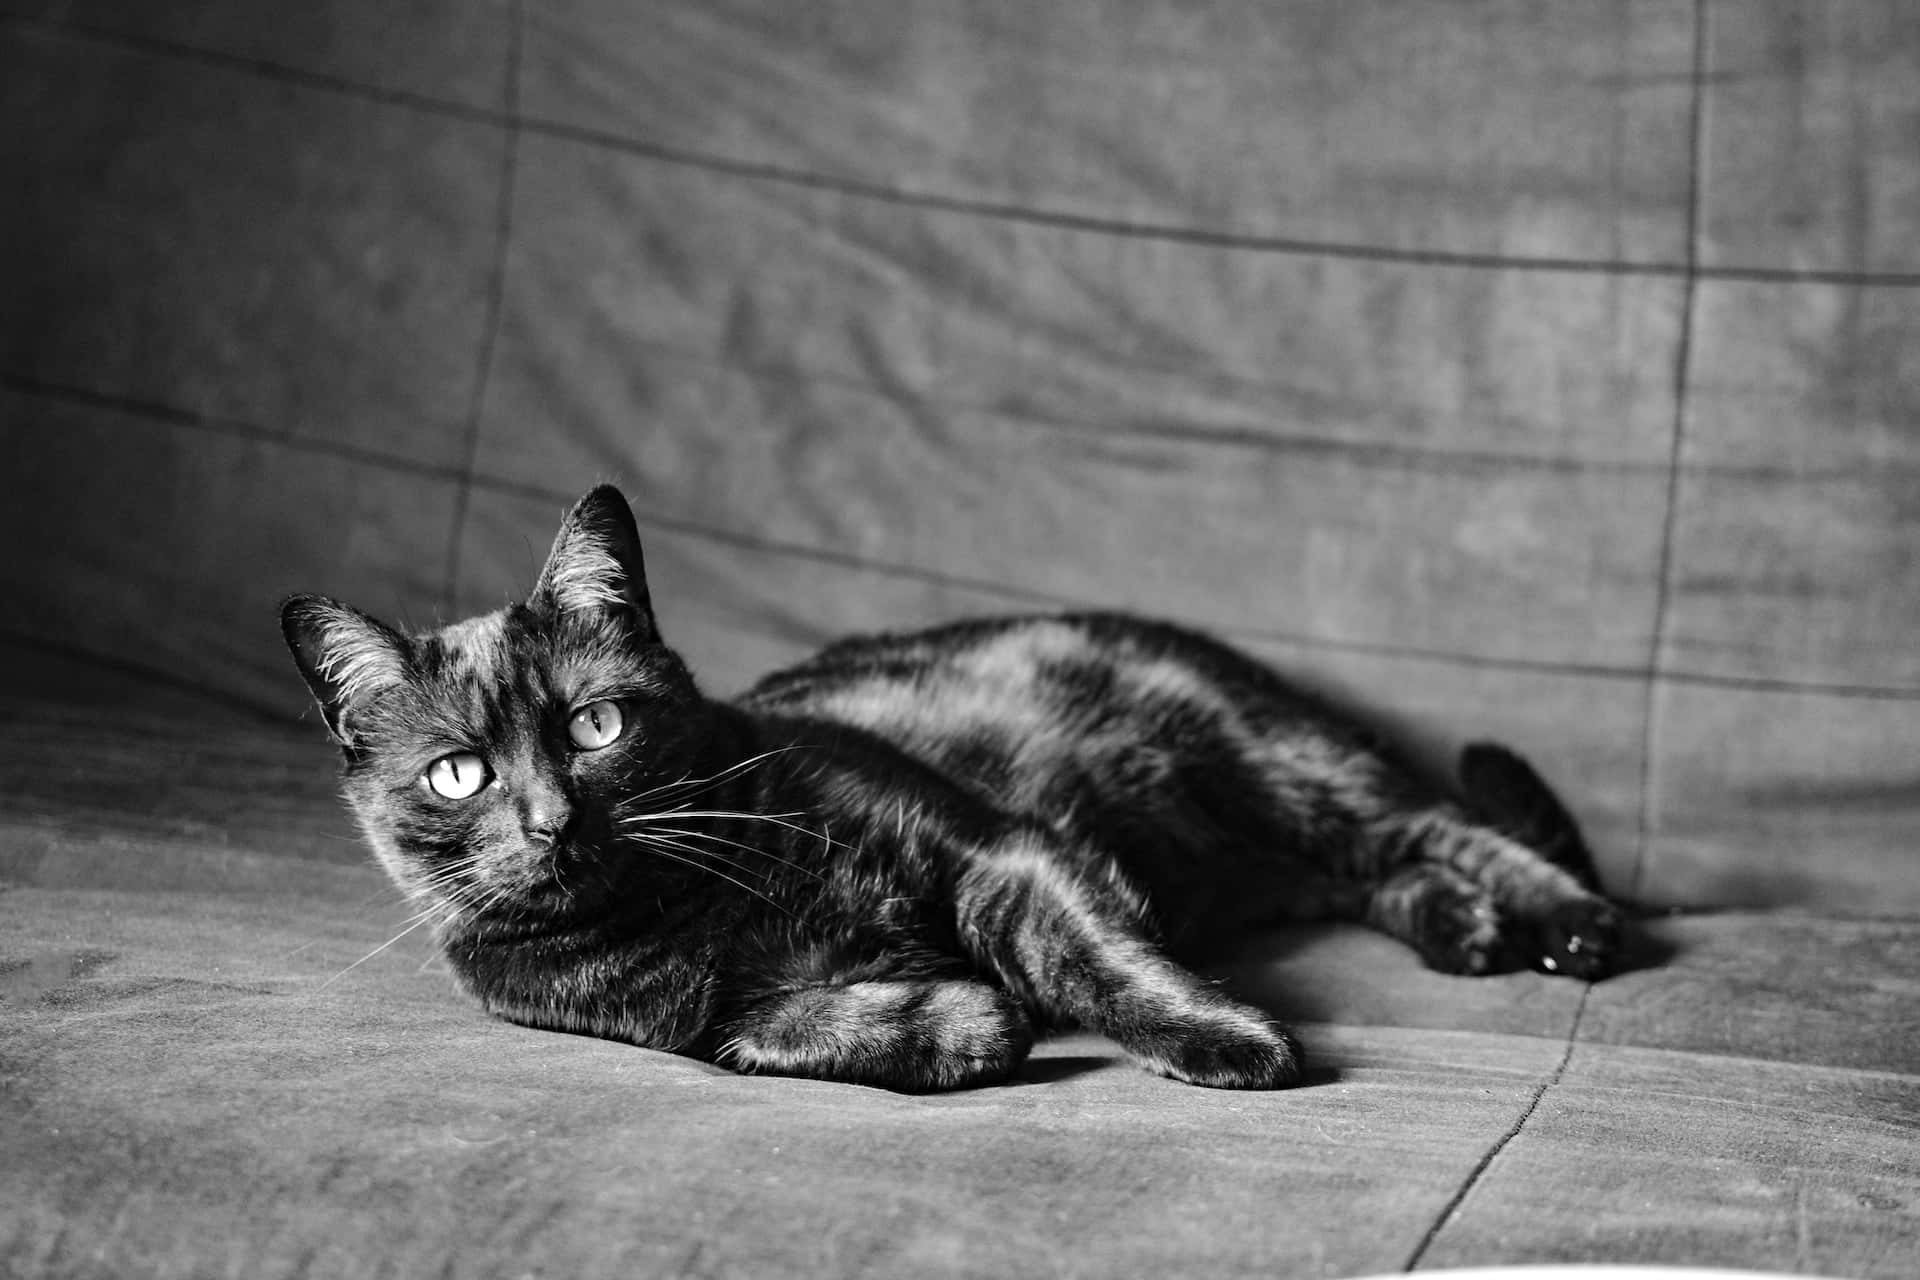 Captivating black and white animal photography Wallpaper